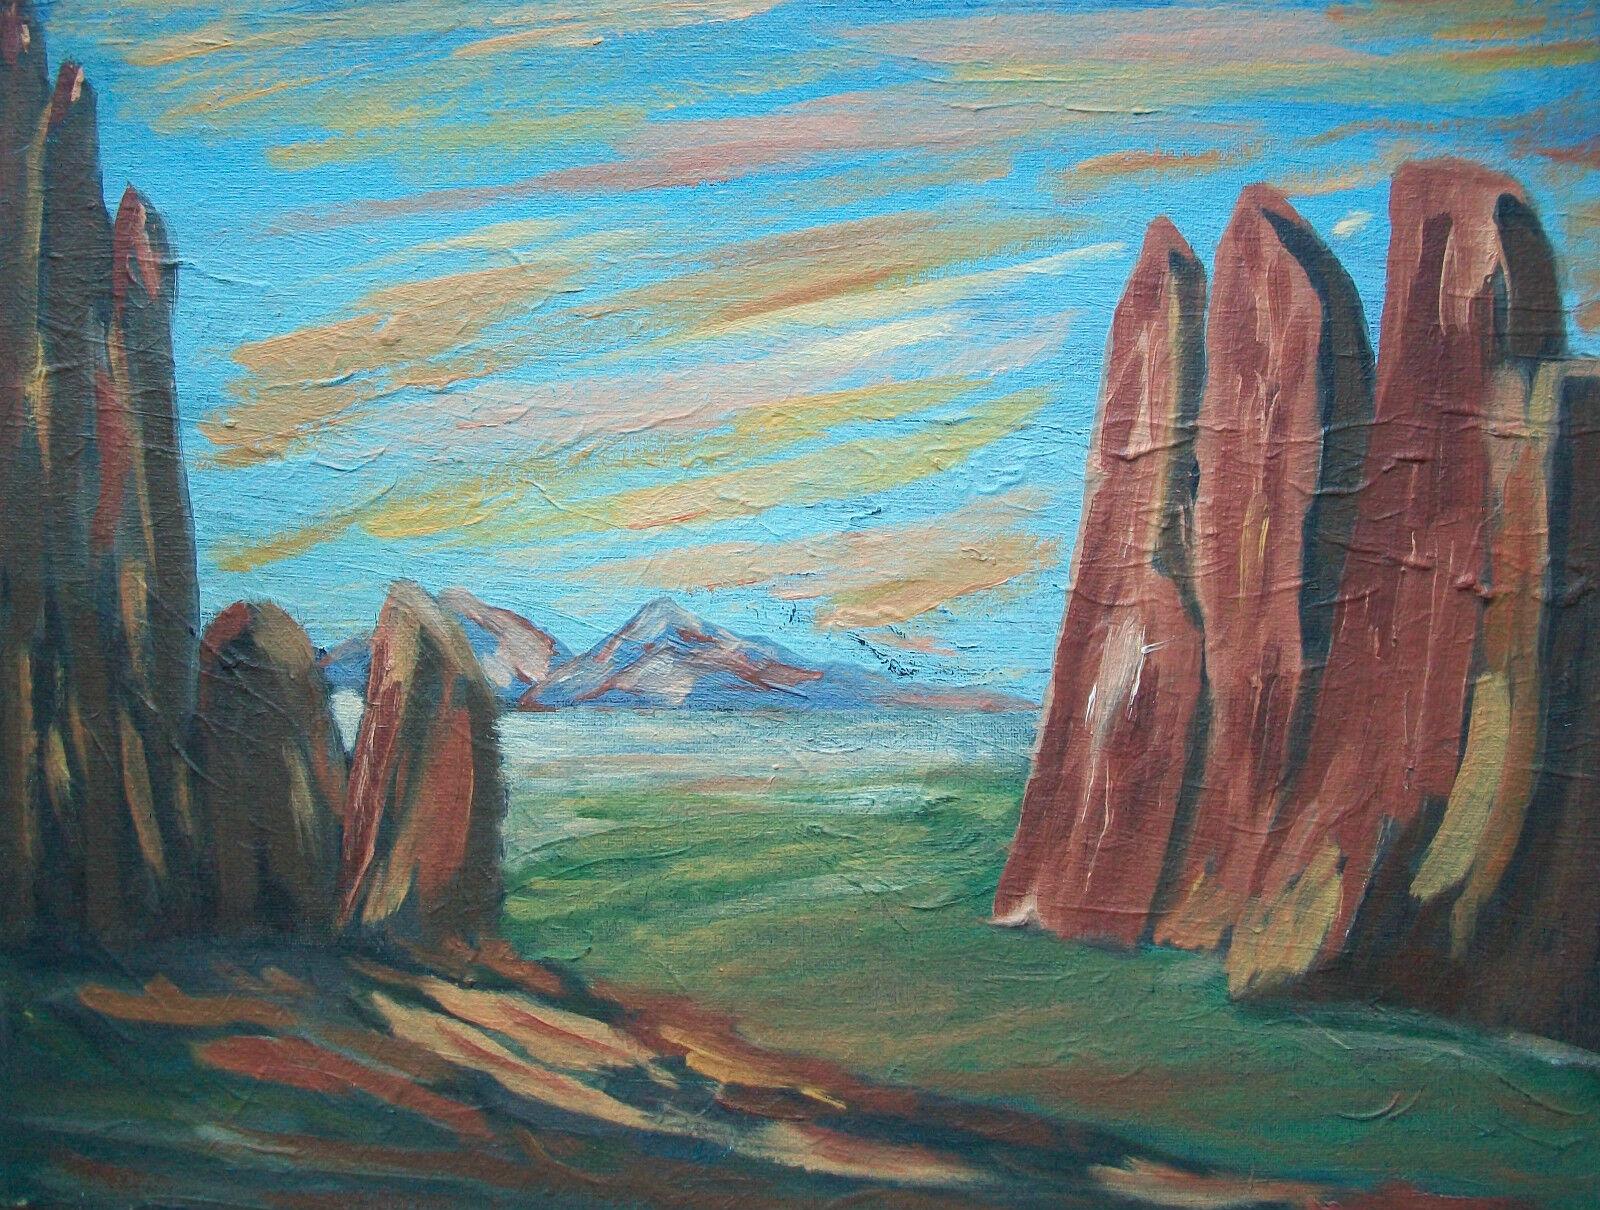 ROBERT P. FLYNN - Vintage Surrealist style landscape oil painting on artist's canvas covered panel - signed and dated verso - unframed - Canada (likely) - circa 1970.

Excellent vintage condition - professionally cleaned - minor scuffs & grime -